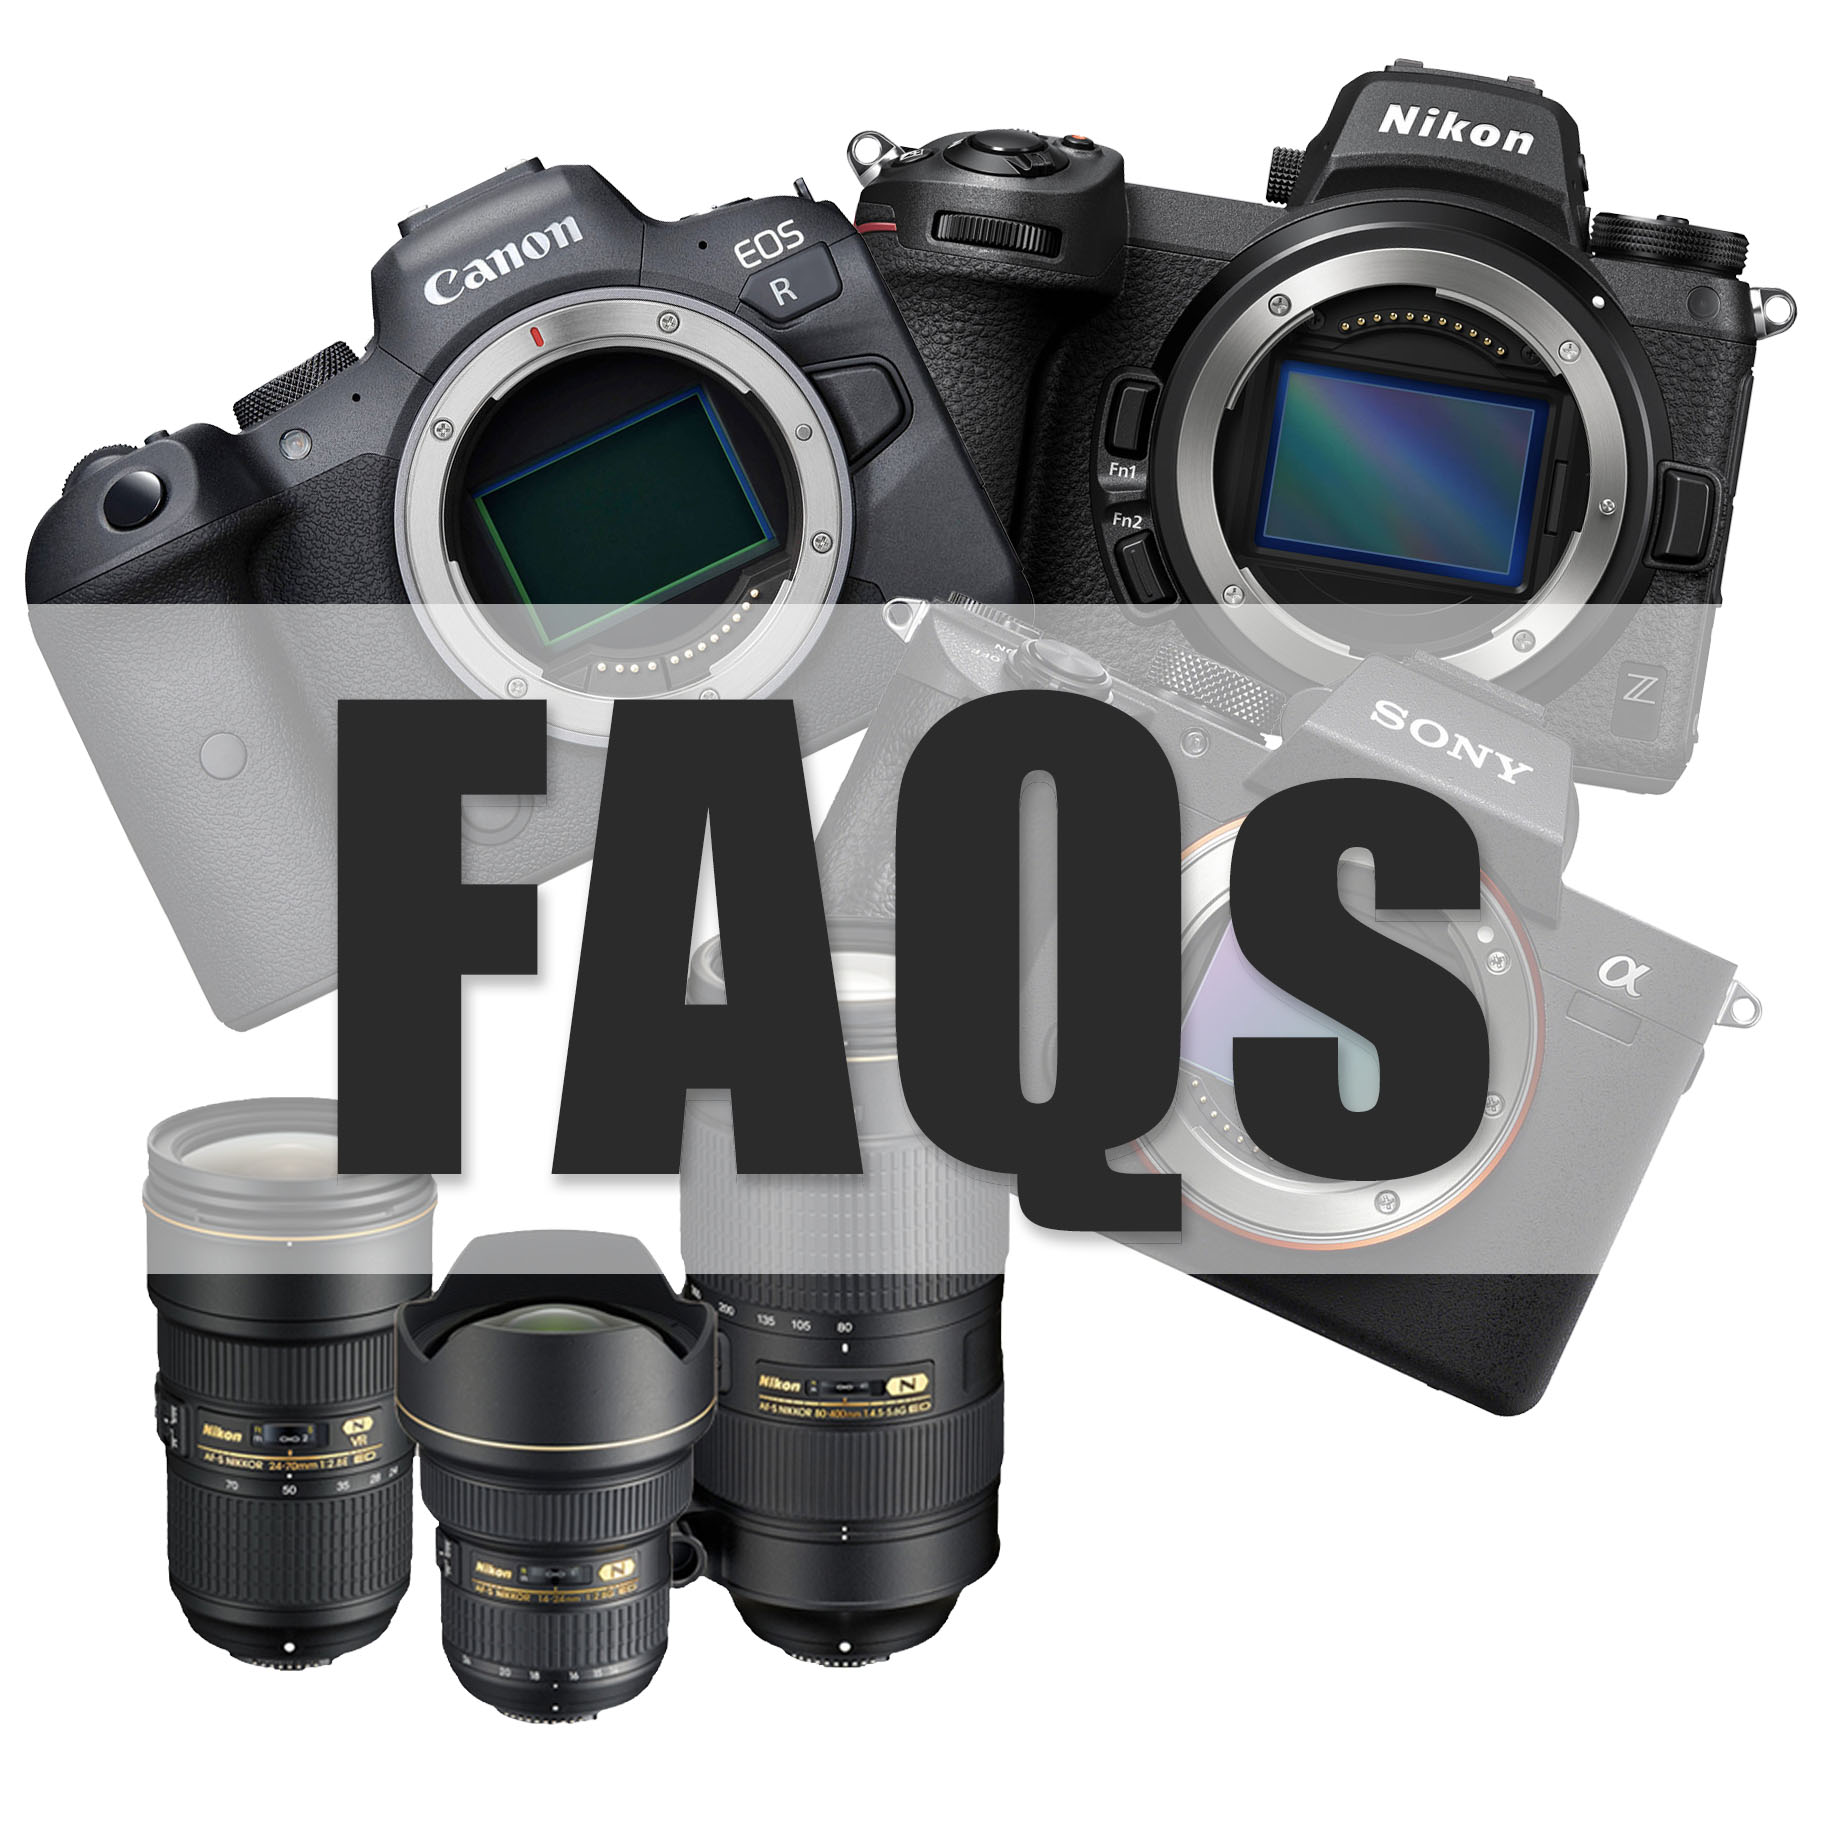 Expozme Photography Frequently Asked Questions Photo Art consisting of three cameras and three lenses with FAQ written on top and center of the photo.